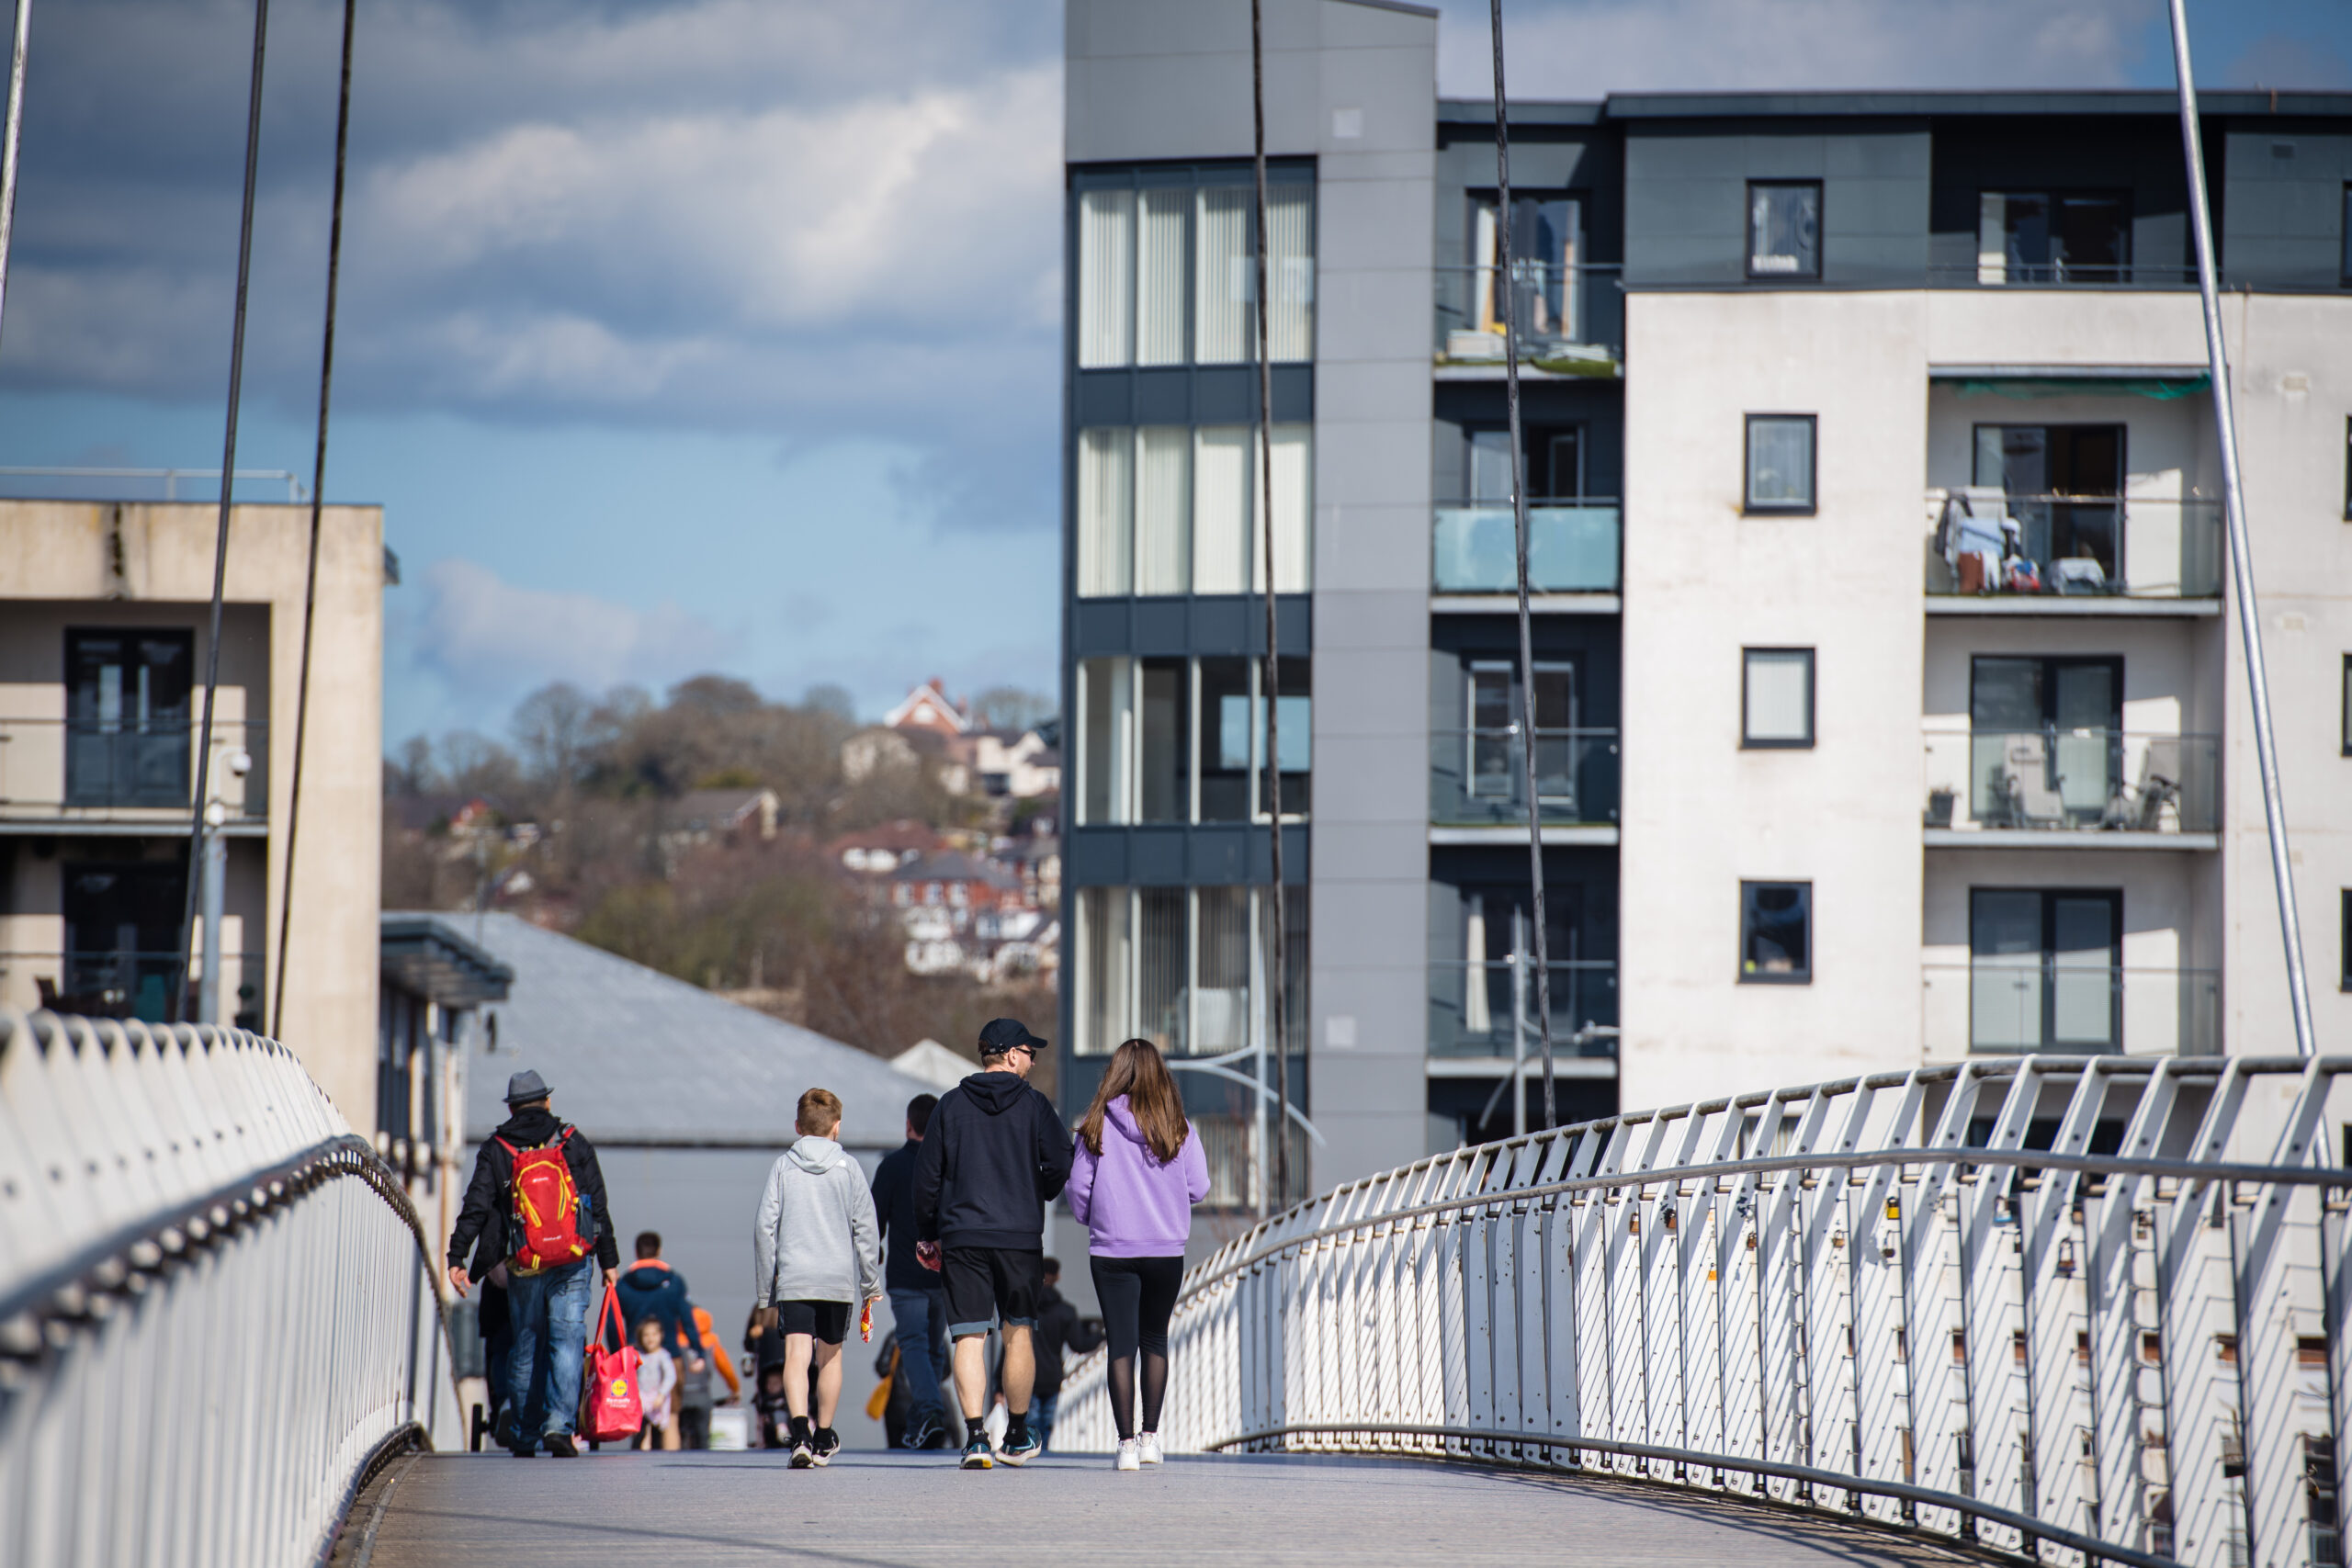 Picture by Polly Thomas - Darren Hughes argues we need a national conversation on the NHS. The picture features people walking on the Footbridge in Newport.